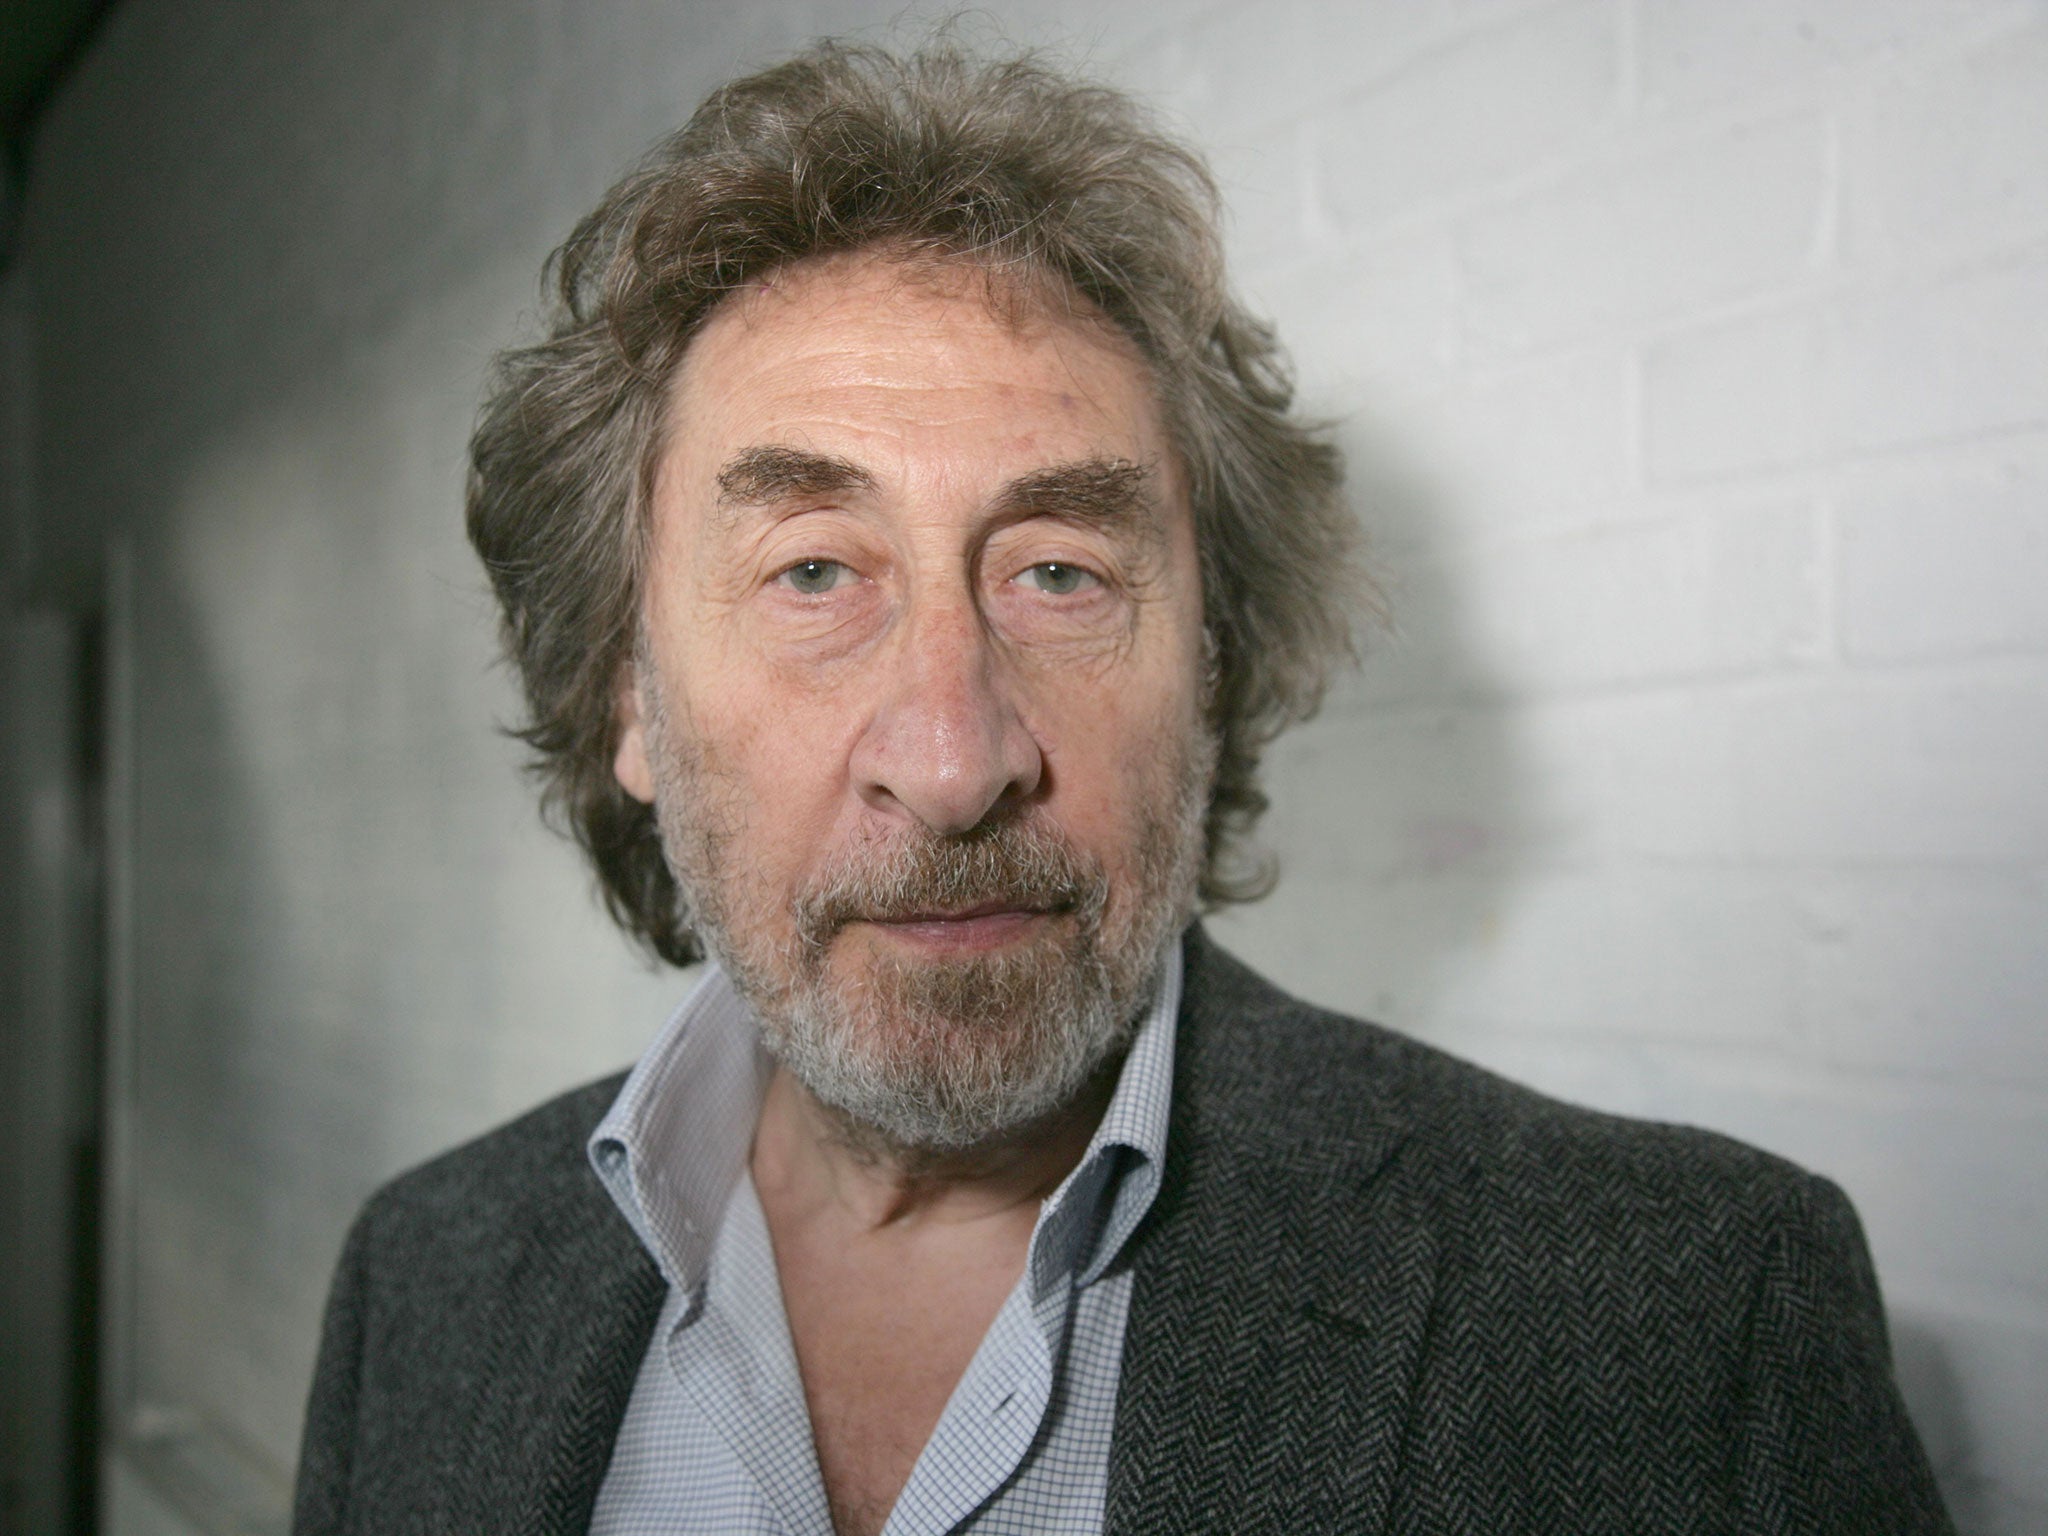 British author Howard Jacobson has been long-listed for the Man Booker Prize